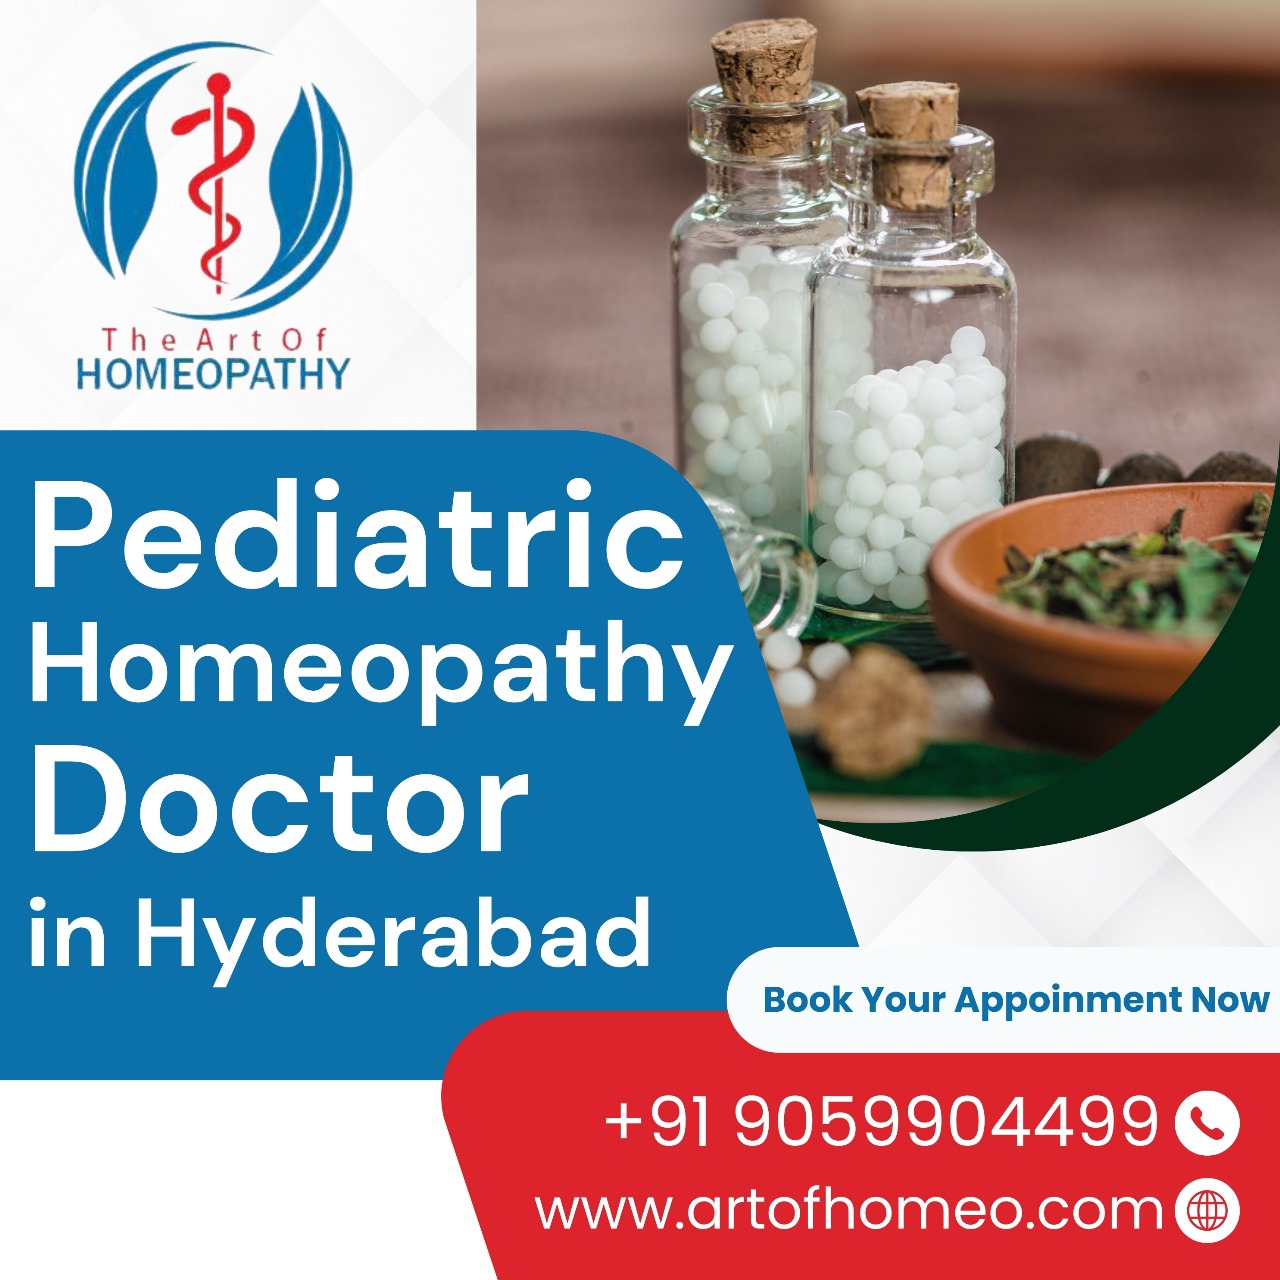 Pediatric Homeopathy Doctor in Hyderabad